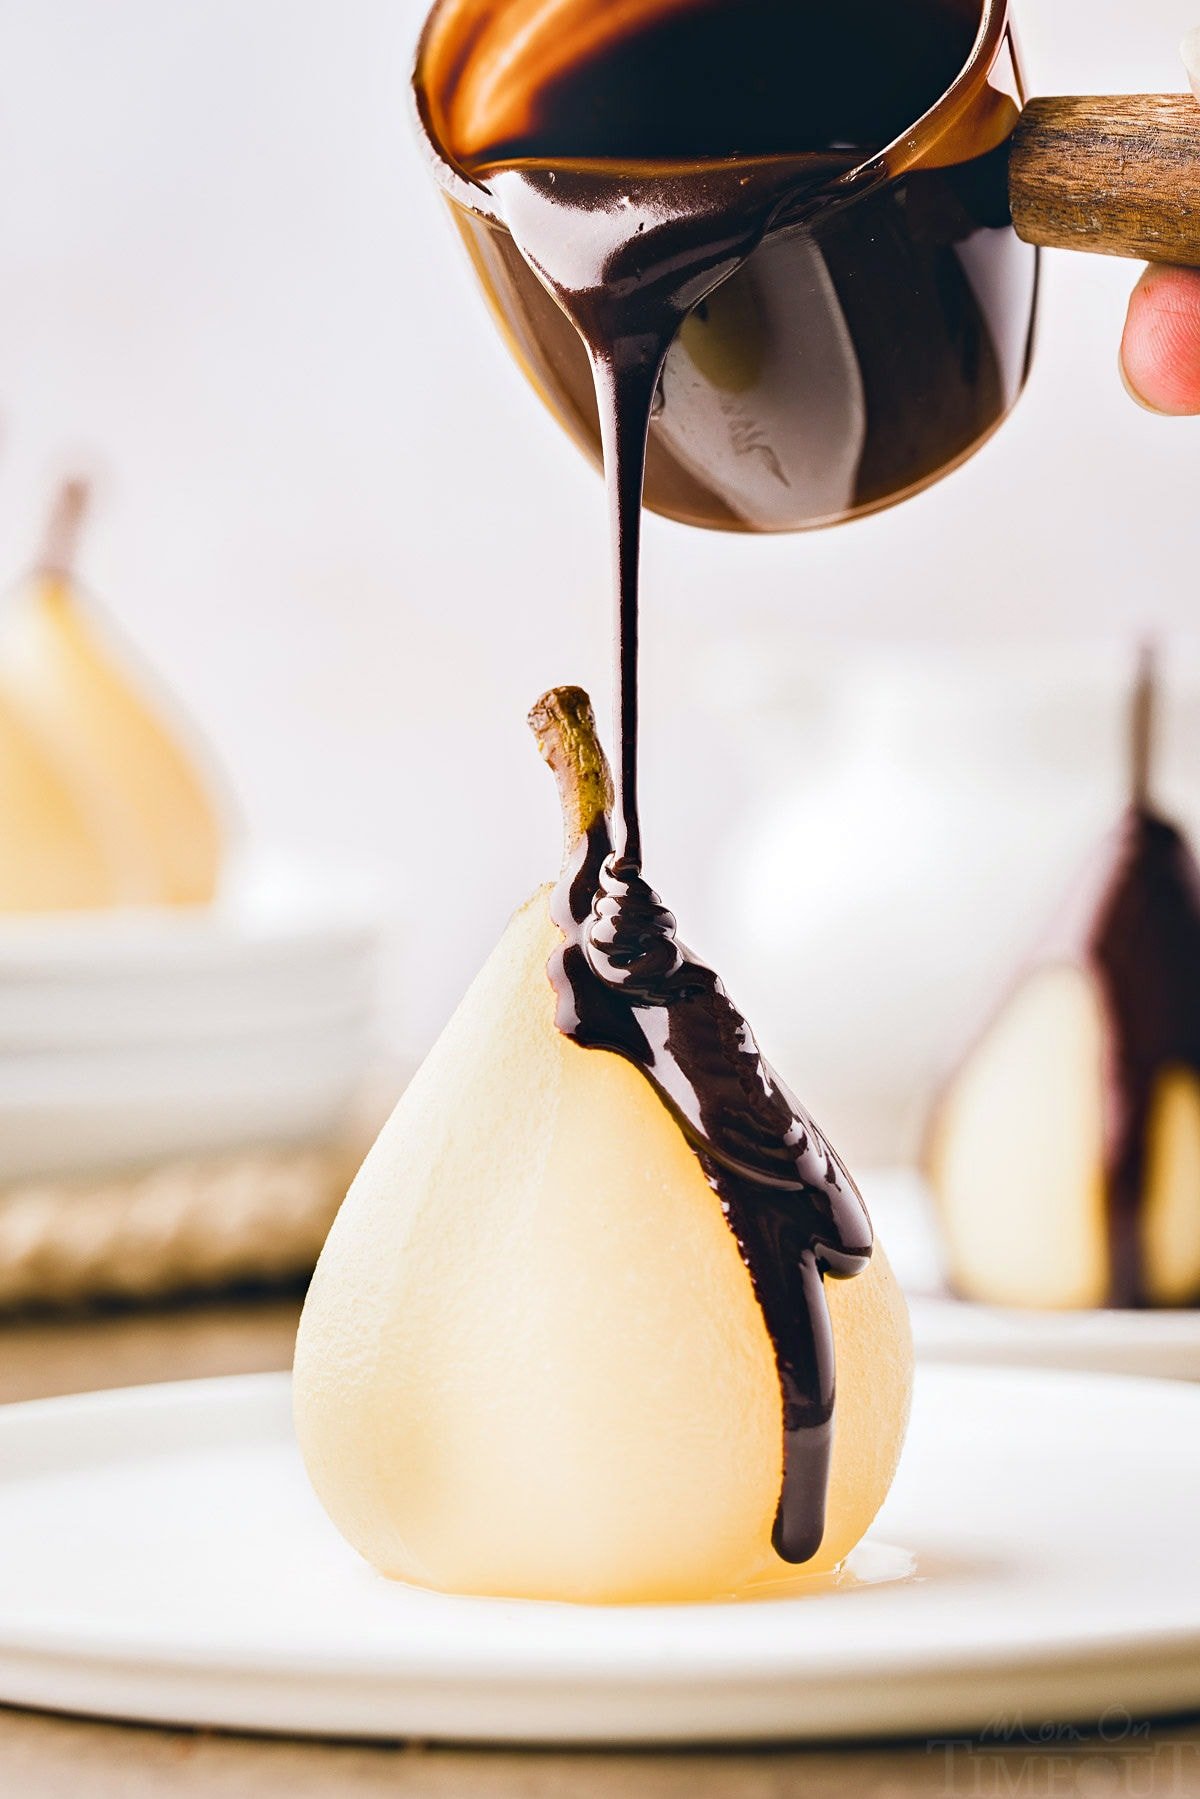 poached pear sitting on white plate with chocolate sauce about to being drizzled onto the pear.